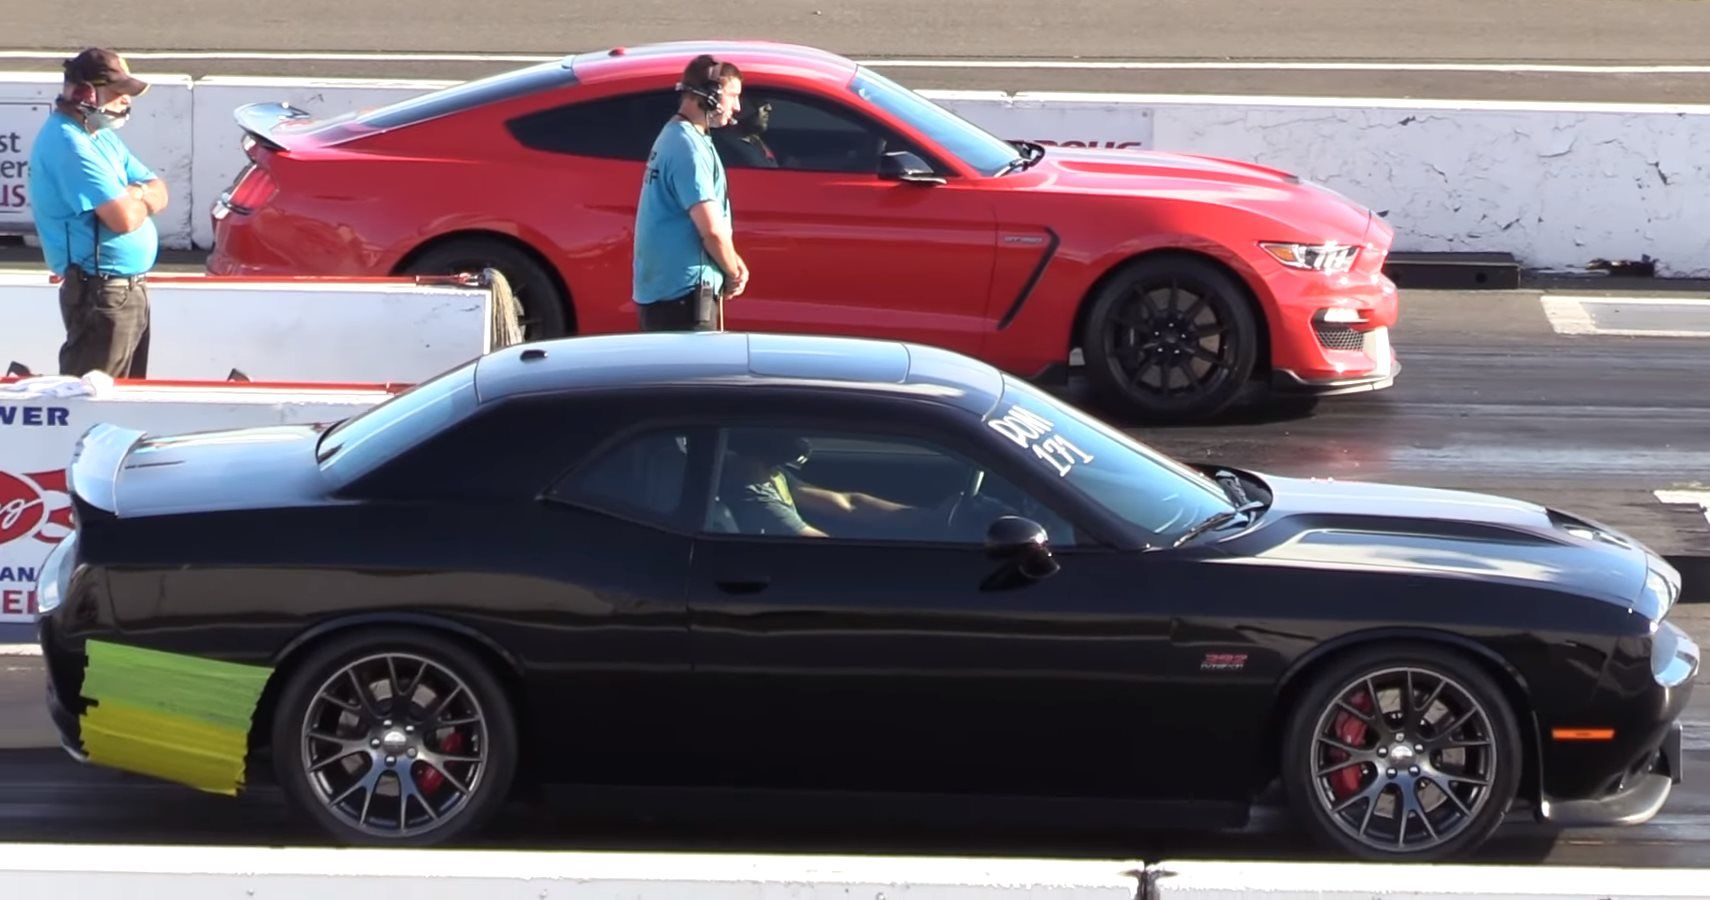 A Dodge Challenger Srt 392 Takes On A Shelby Mustang Gt350 In Drag Race 